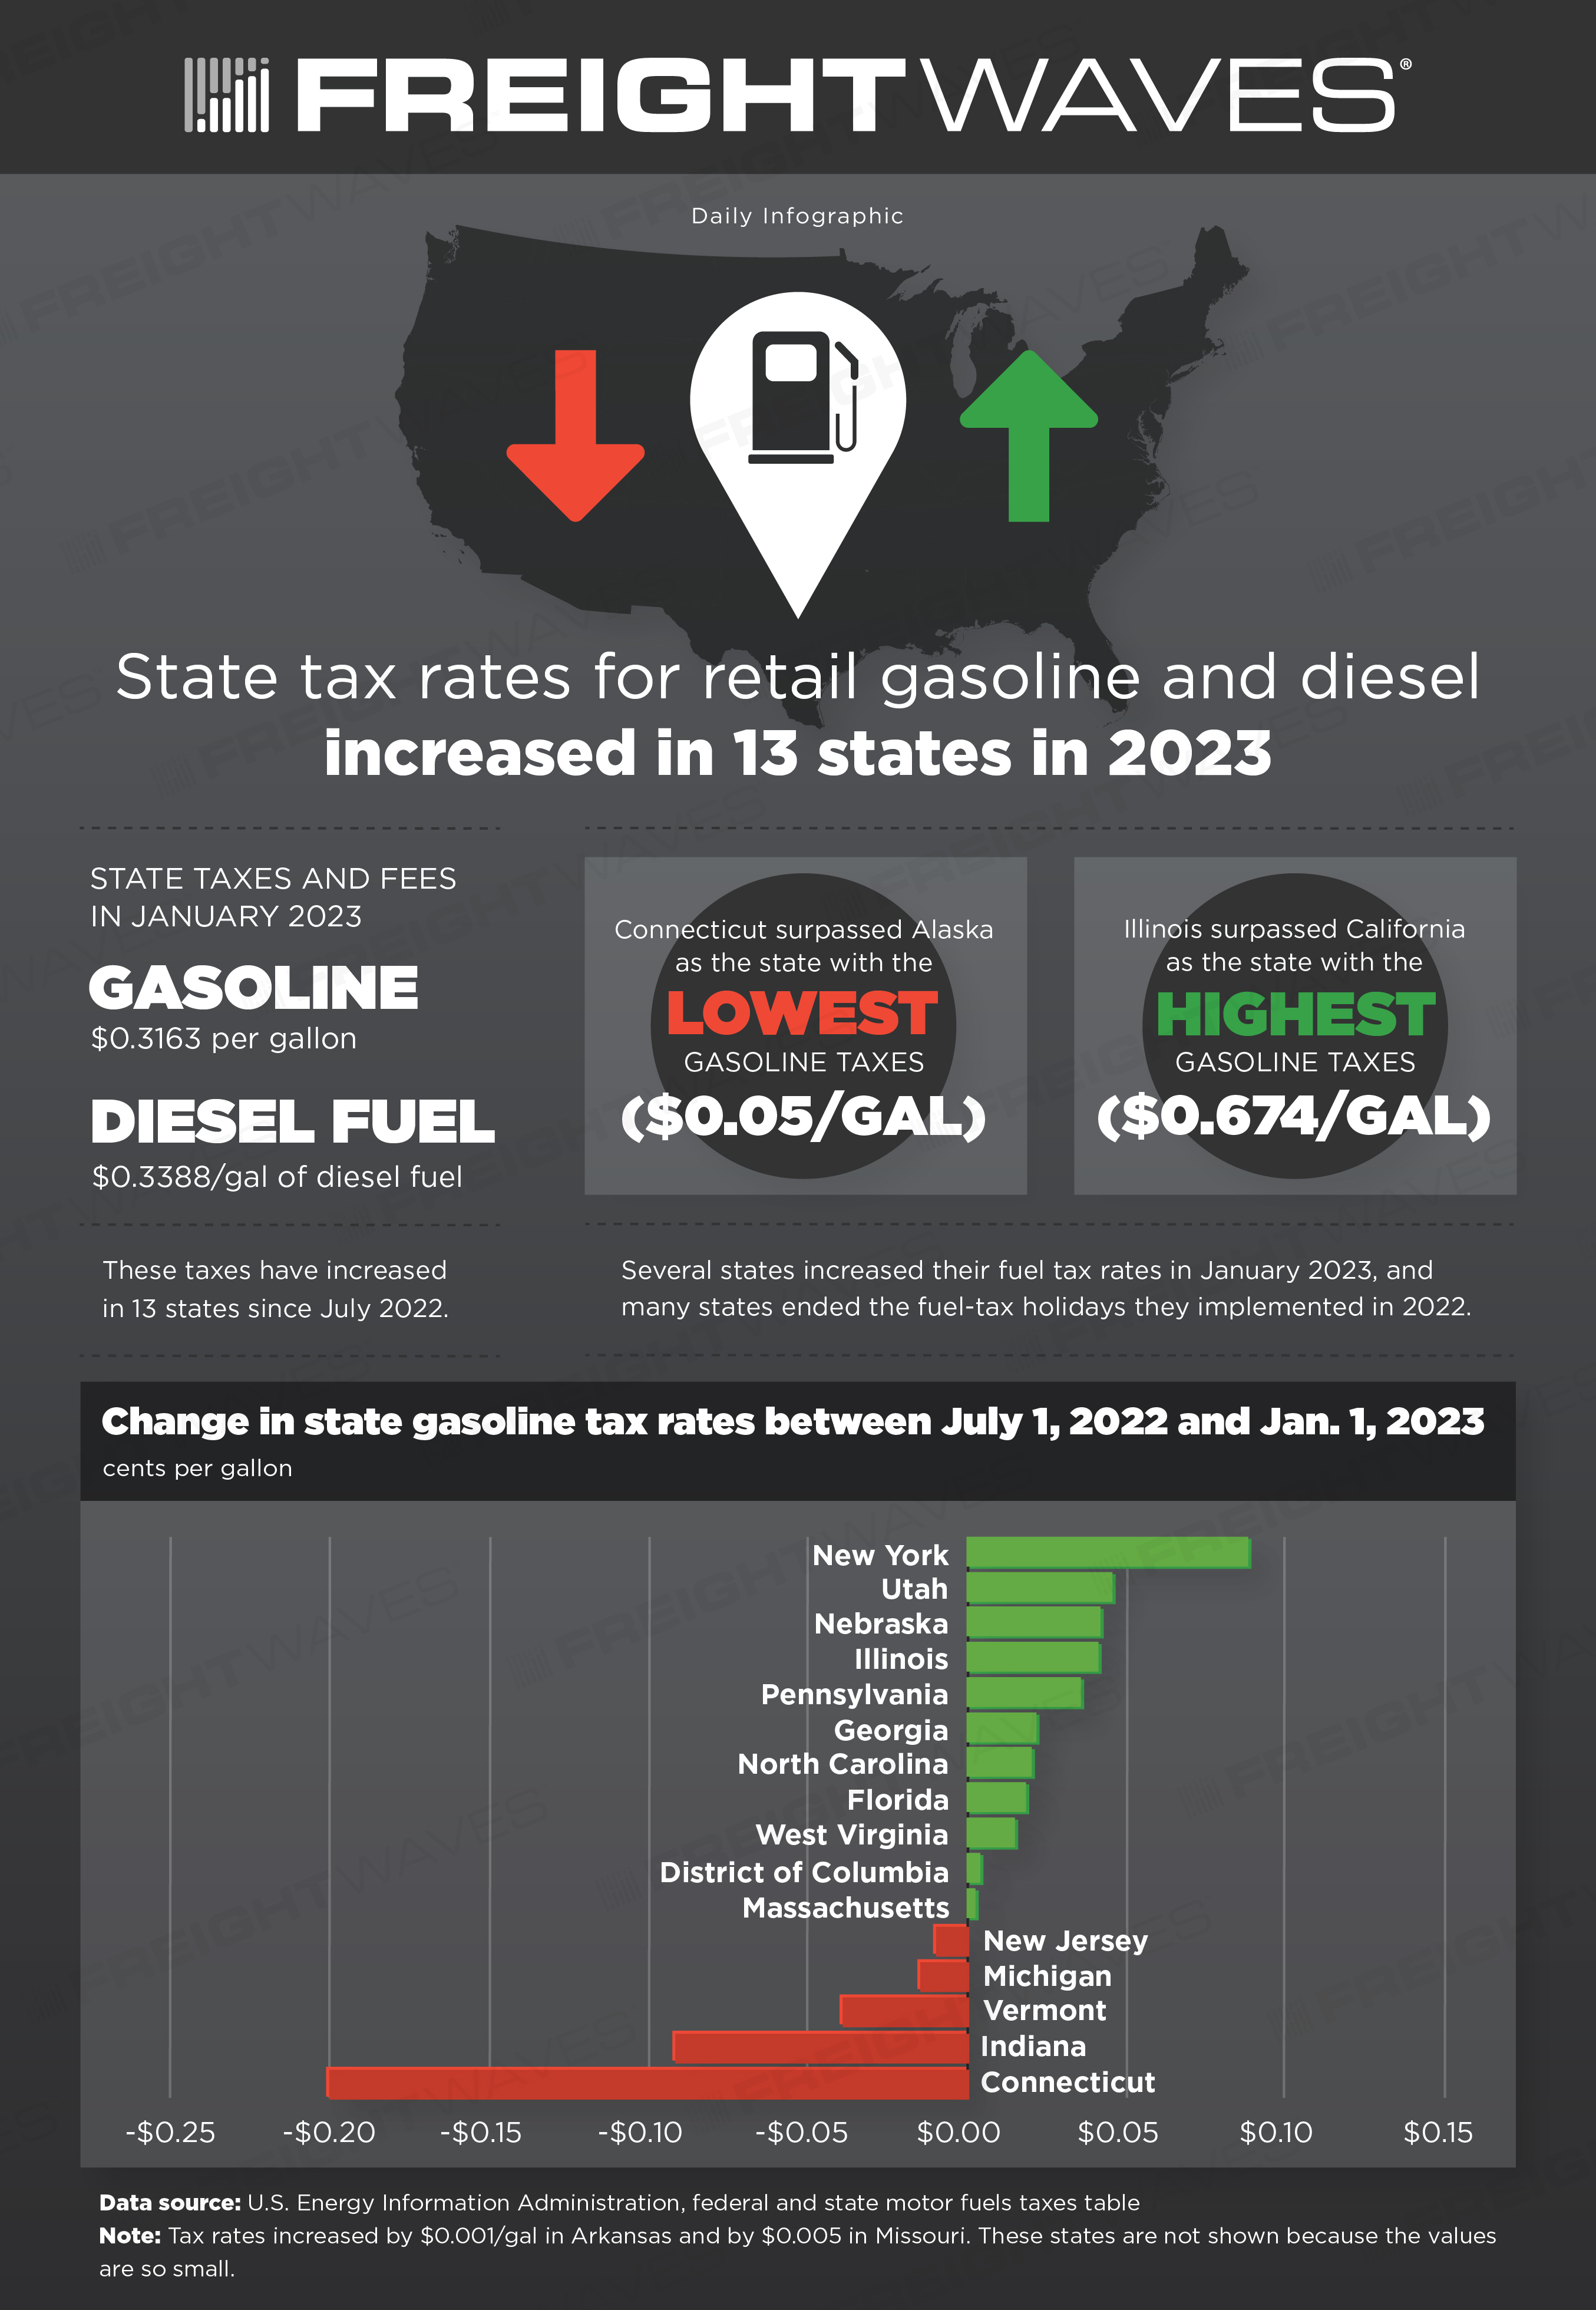 daily-infographic-state-tax-rates-for-retail-gasoline-and-diesel